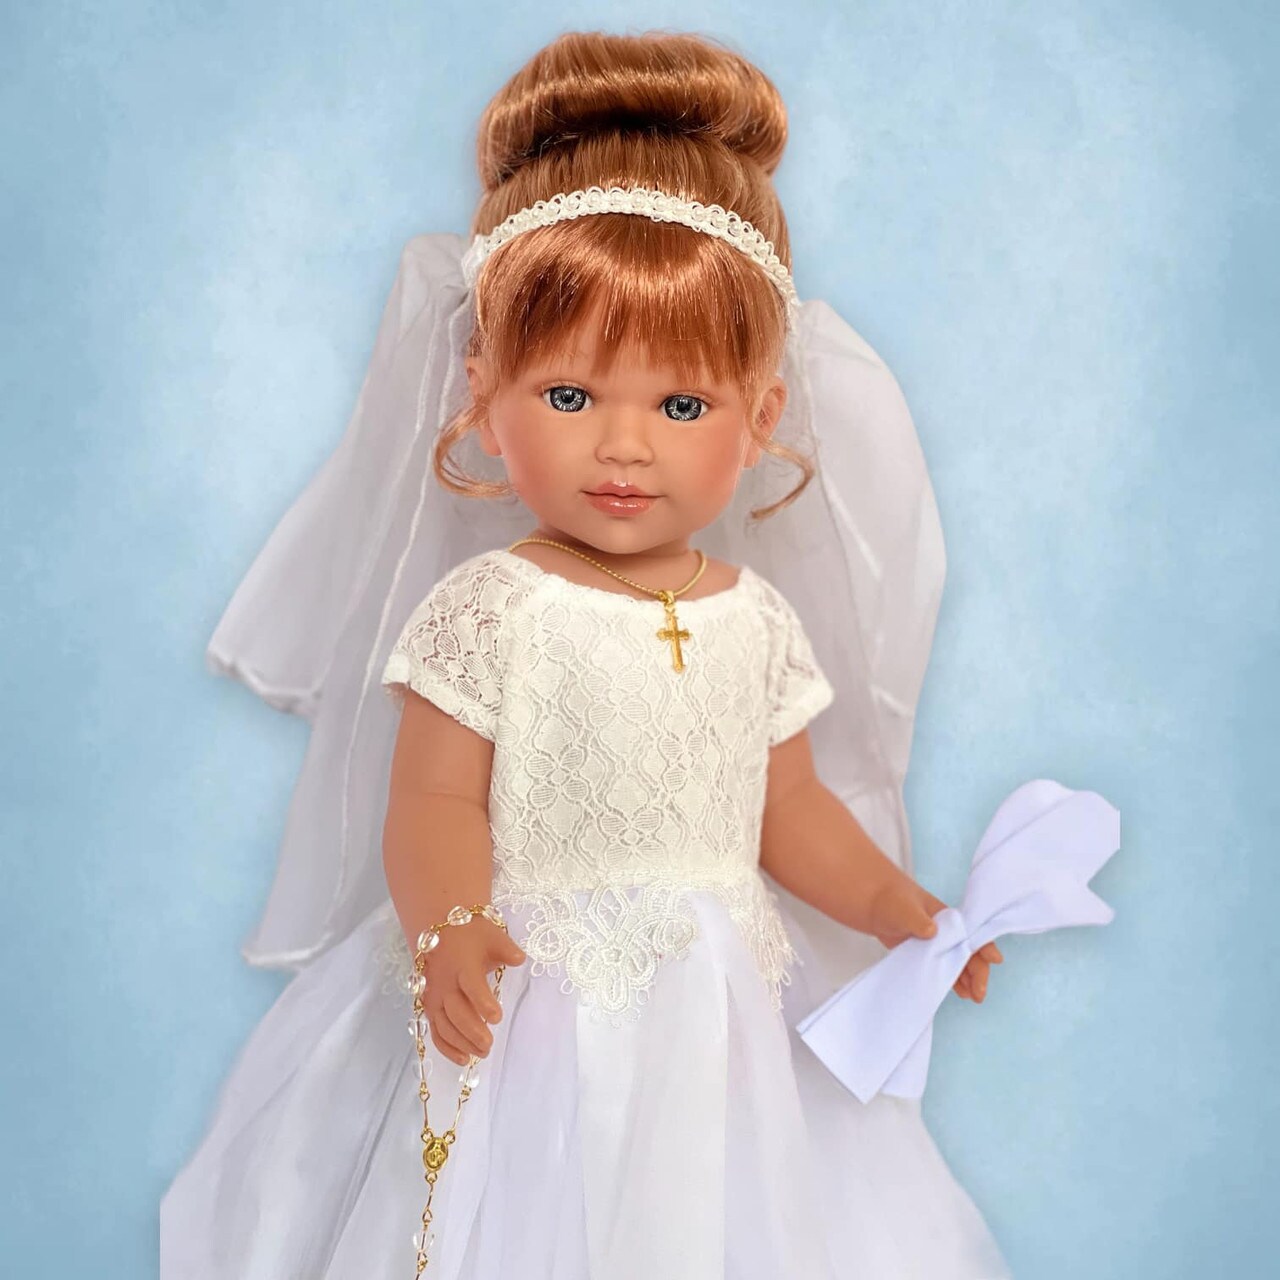 Allegra Communion Gown with Accessories For 18 Inch Dolls- Doll Clothes